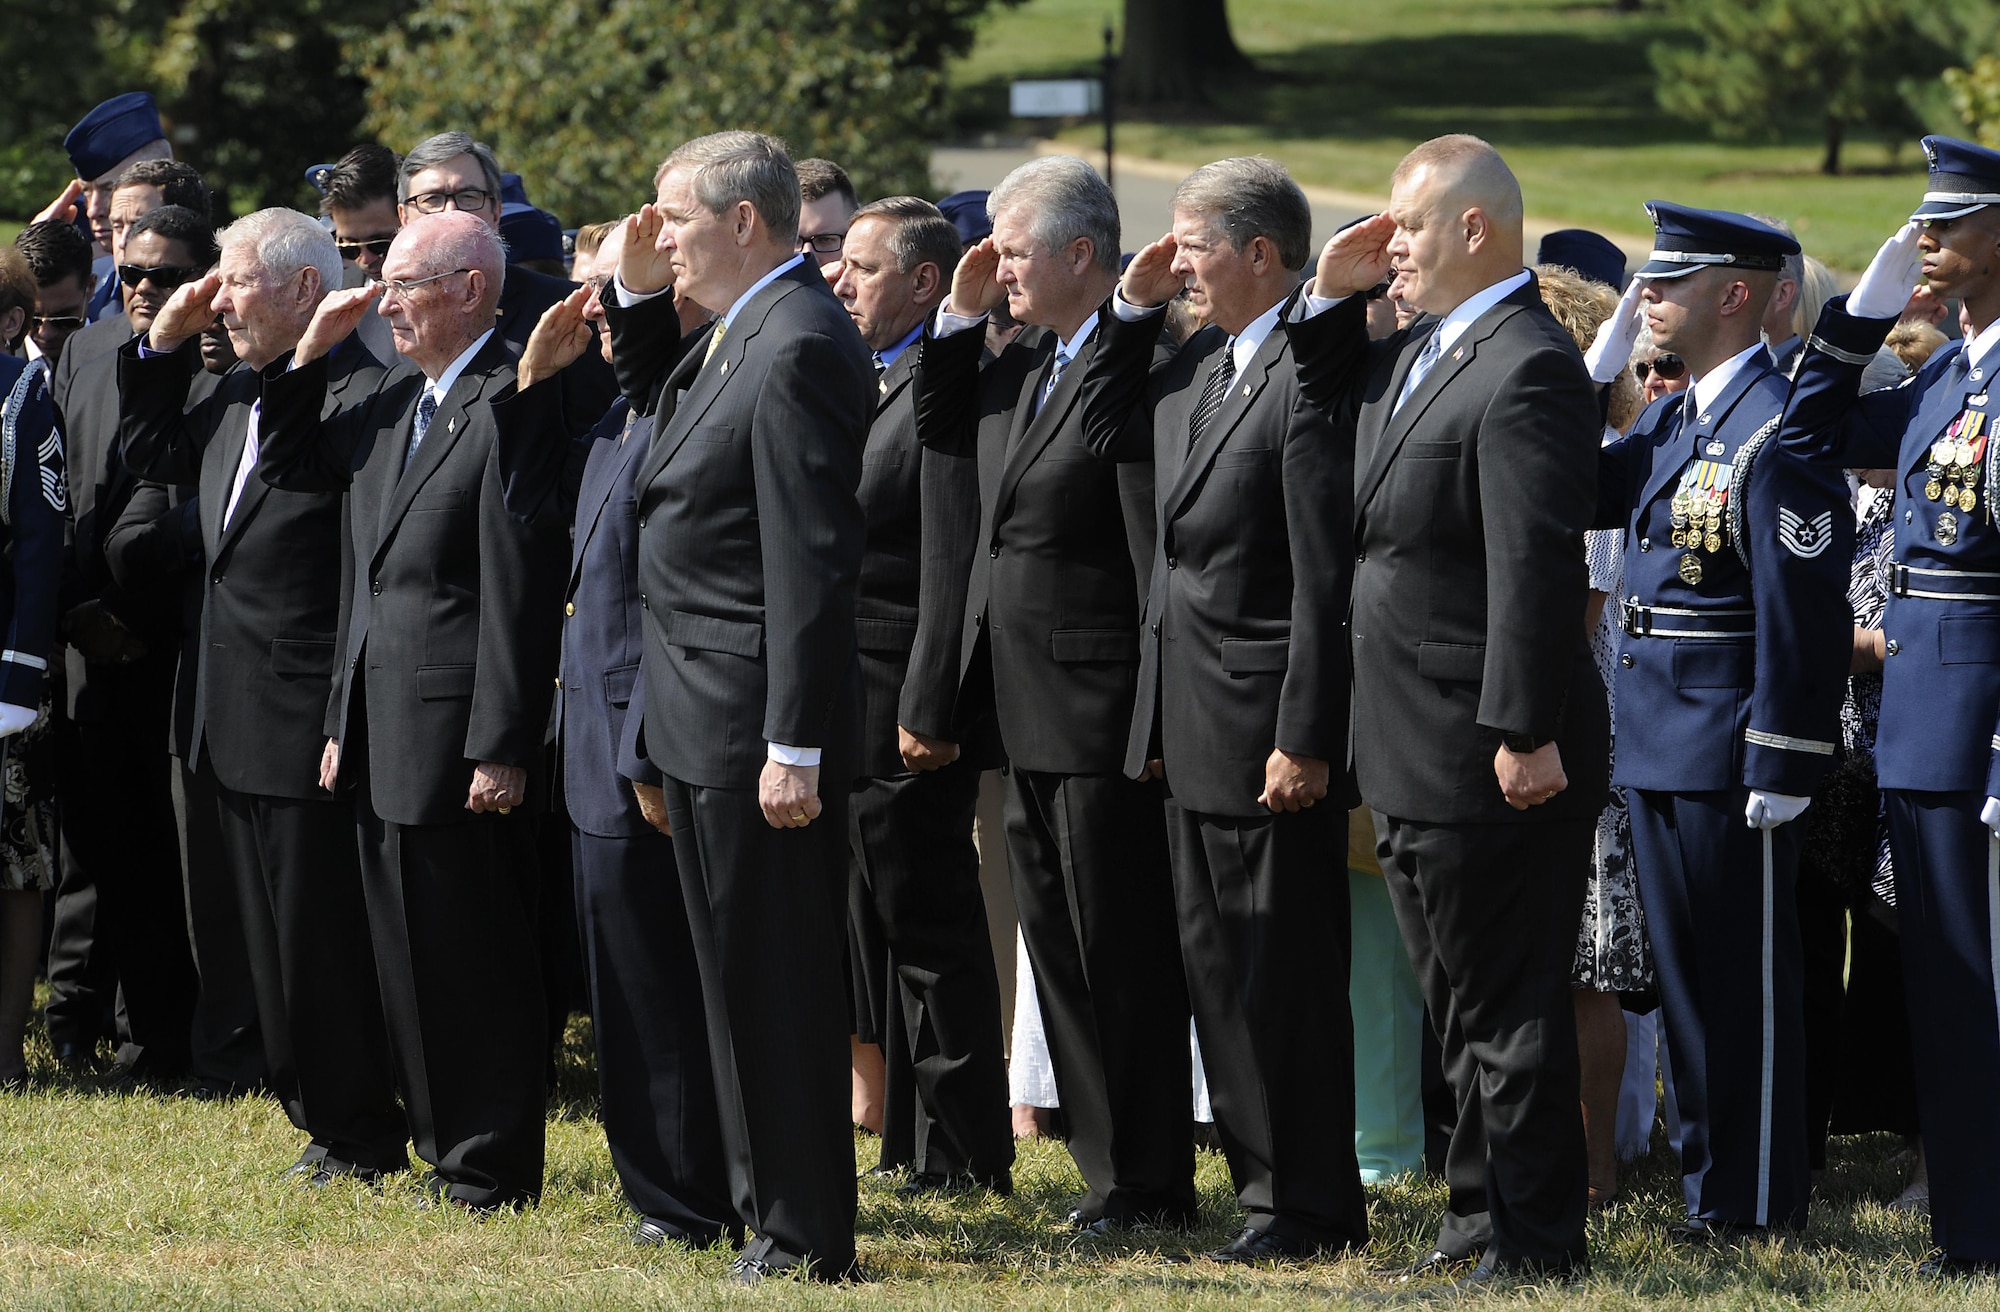 A group of former chief master sergeants of the Air Force attend the funeral for ninth Chief Master Sgt. of the Air Force James Binnicker in Arlington National Cemetery, Va., Aug. 14, 2015. Binnicker passed away March 21 in Calhoun, Ga. (U.S. Air Force photo/Tech. Sgt. Dan DeCook)